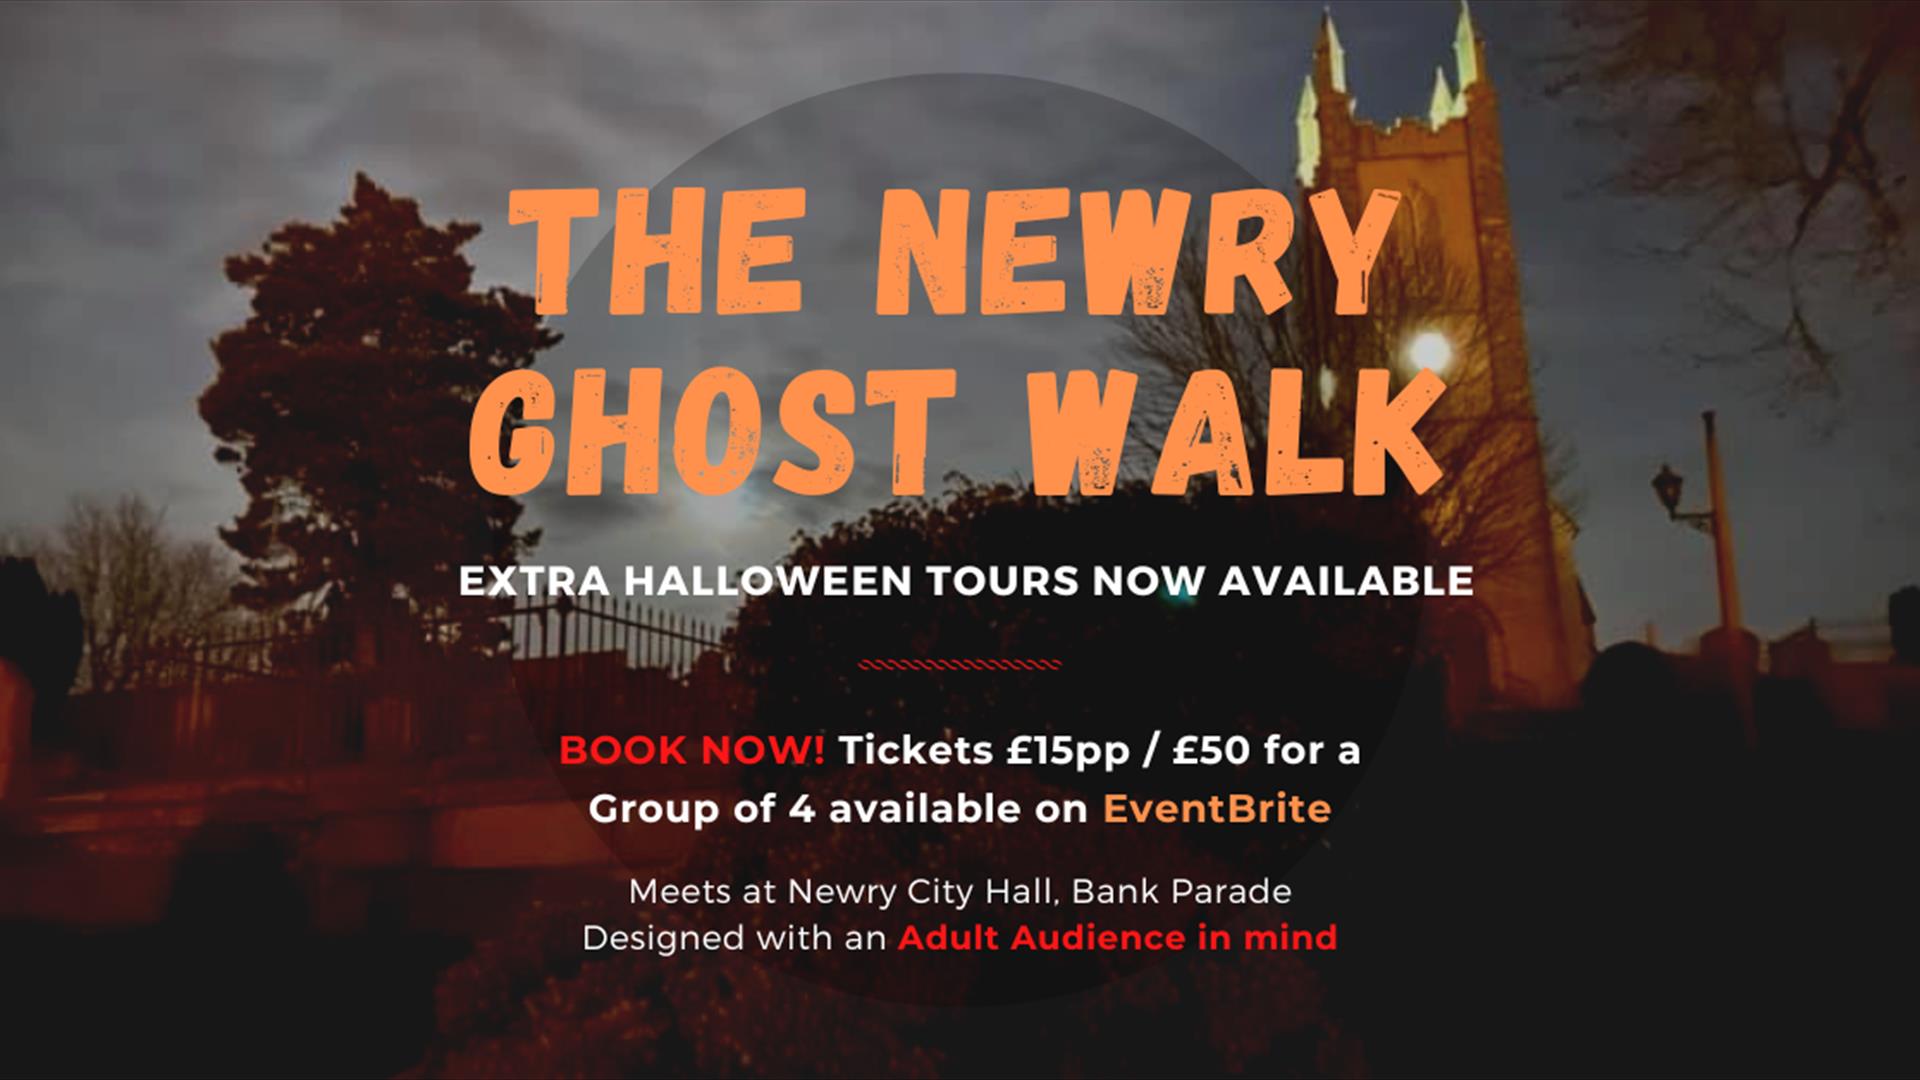 Advertisement for Newry Ghost Walk featuring an atmospheric image of a historic church, bathed in soft twilight with shadows hinting at its haunting p